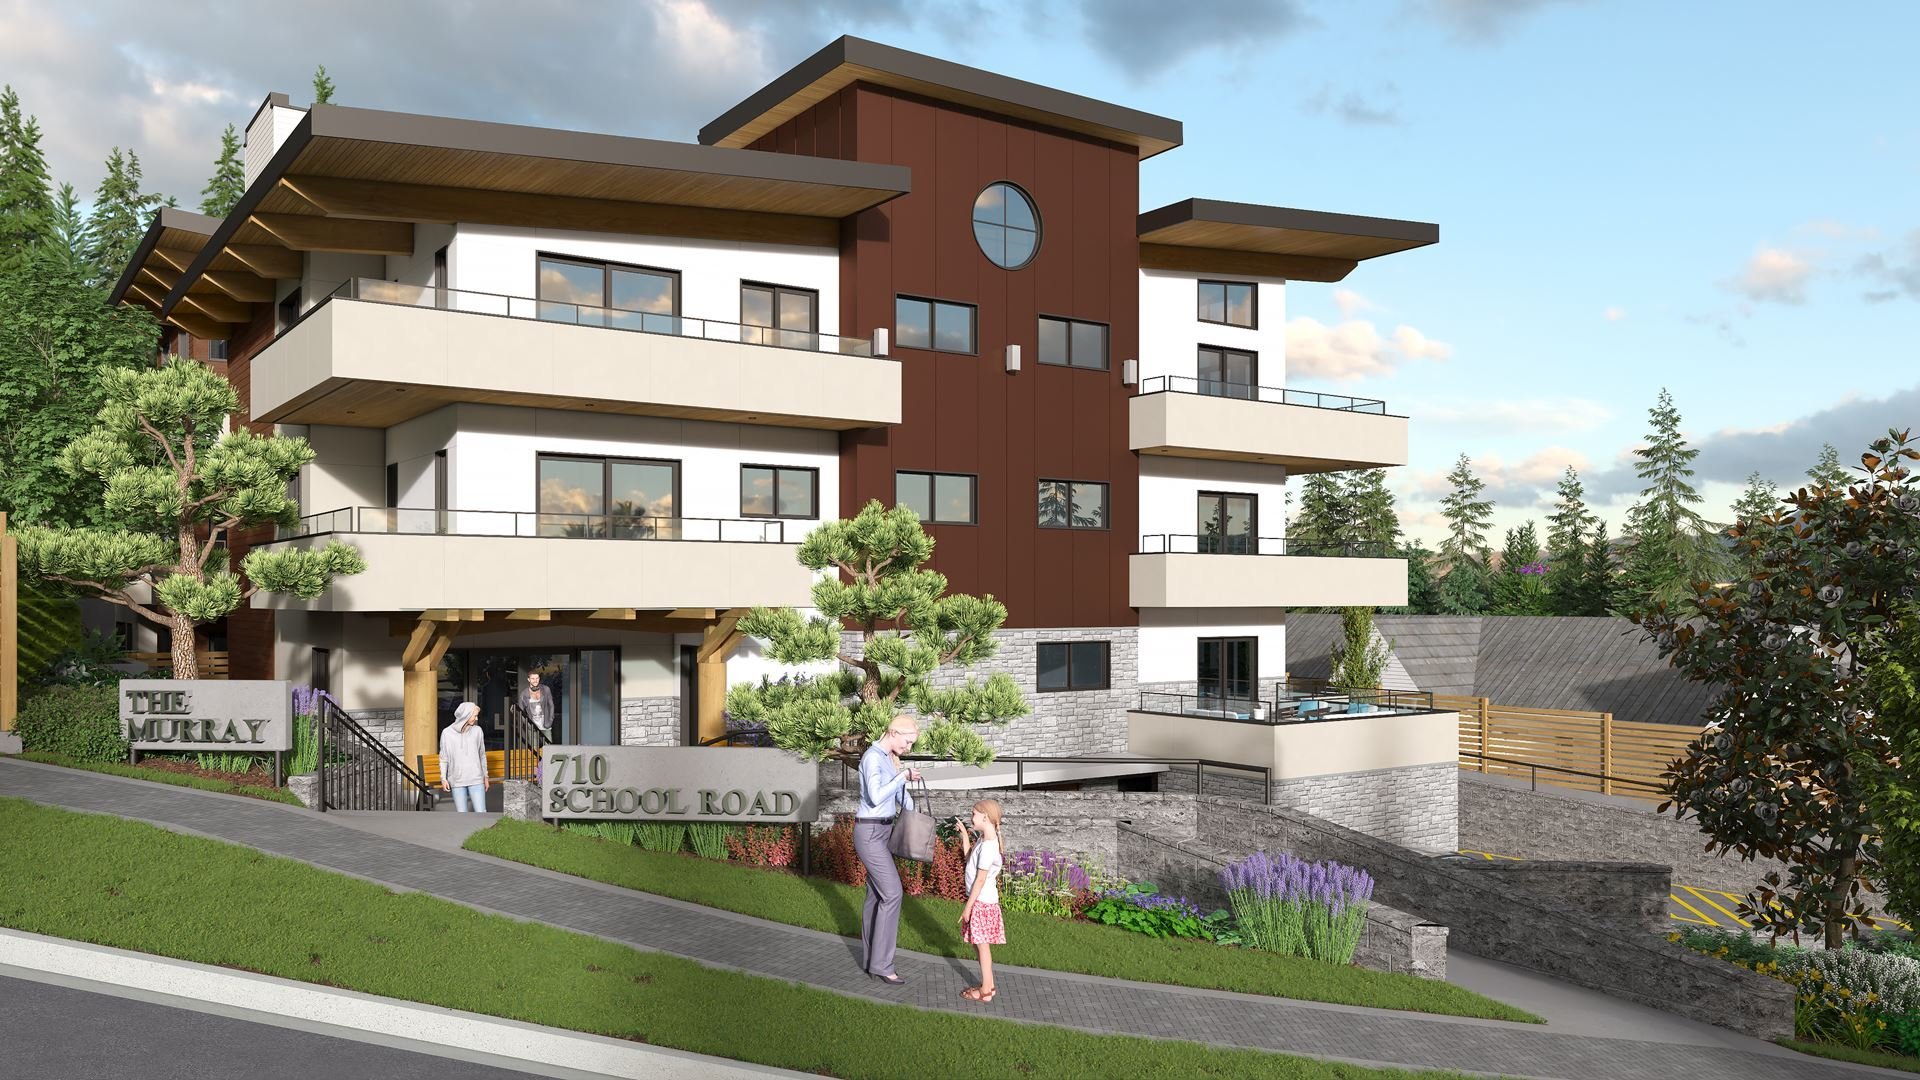 The Murray Gibsons - 710 School Road, Gibsons - Exterior!